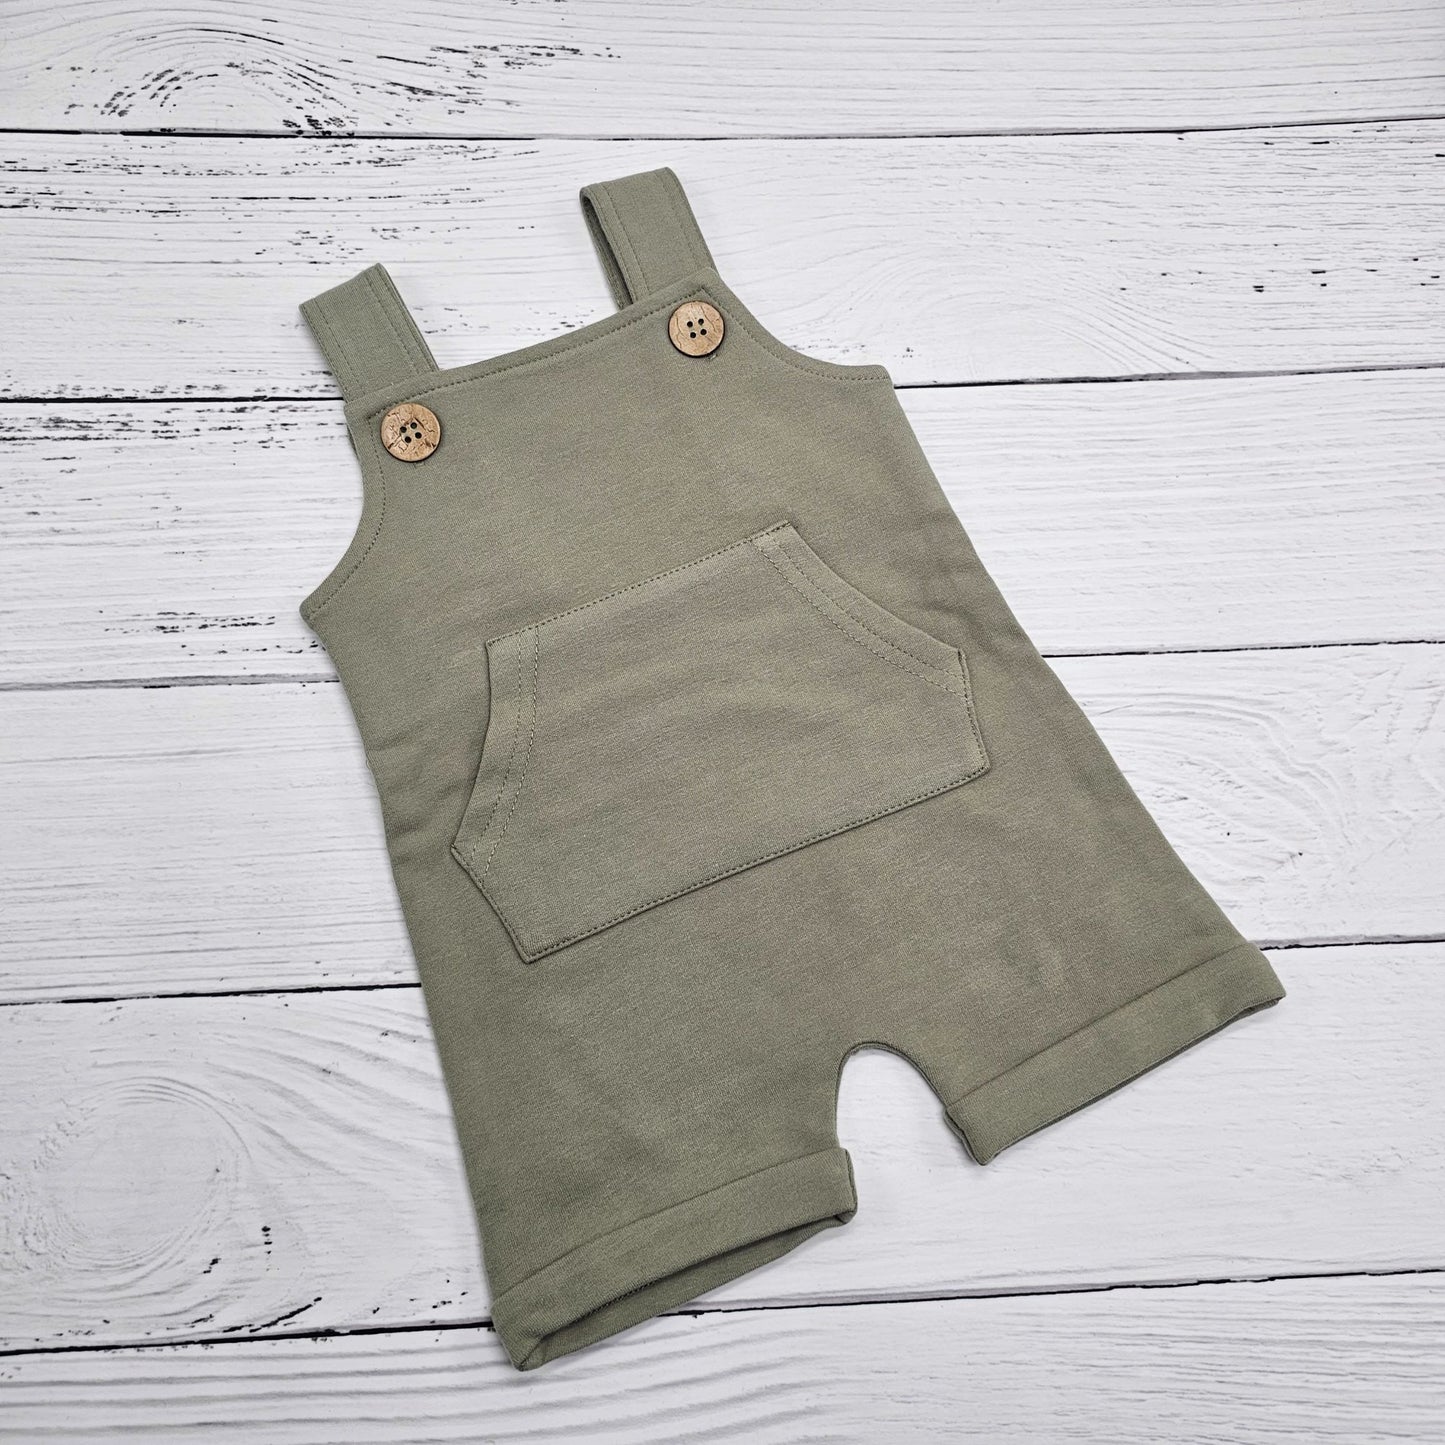 Khaki Green Baby and Toddler overalls that can be embroidered with babies name